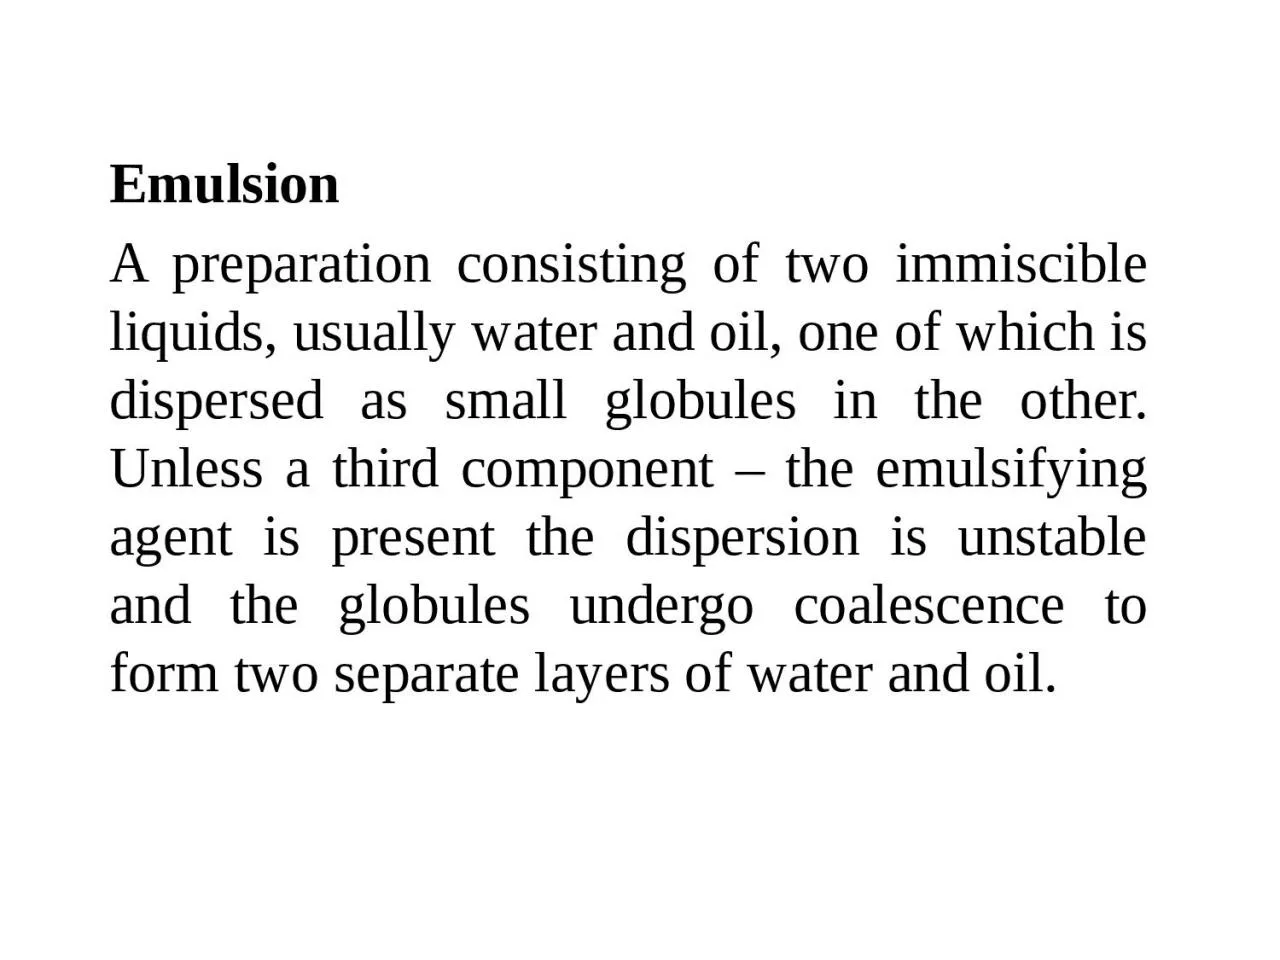 Emulsion  A preparation consisting of two immiscible liquids, usually water and oil, one